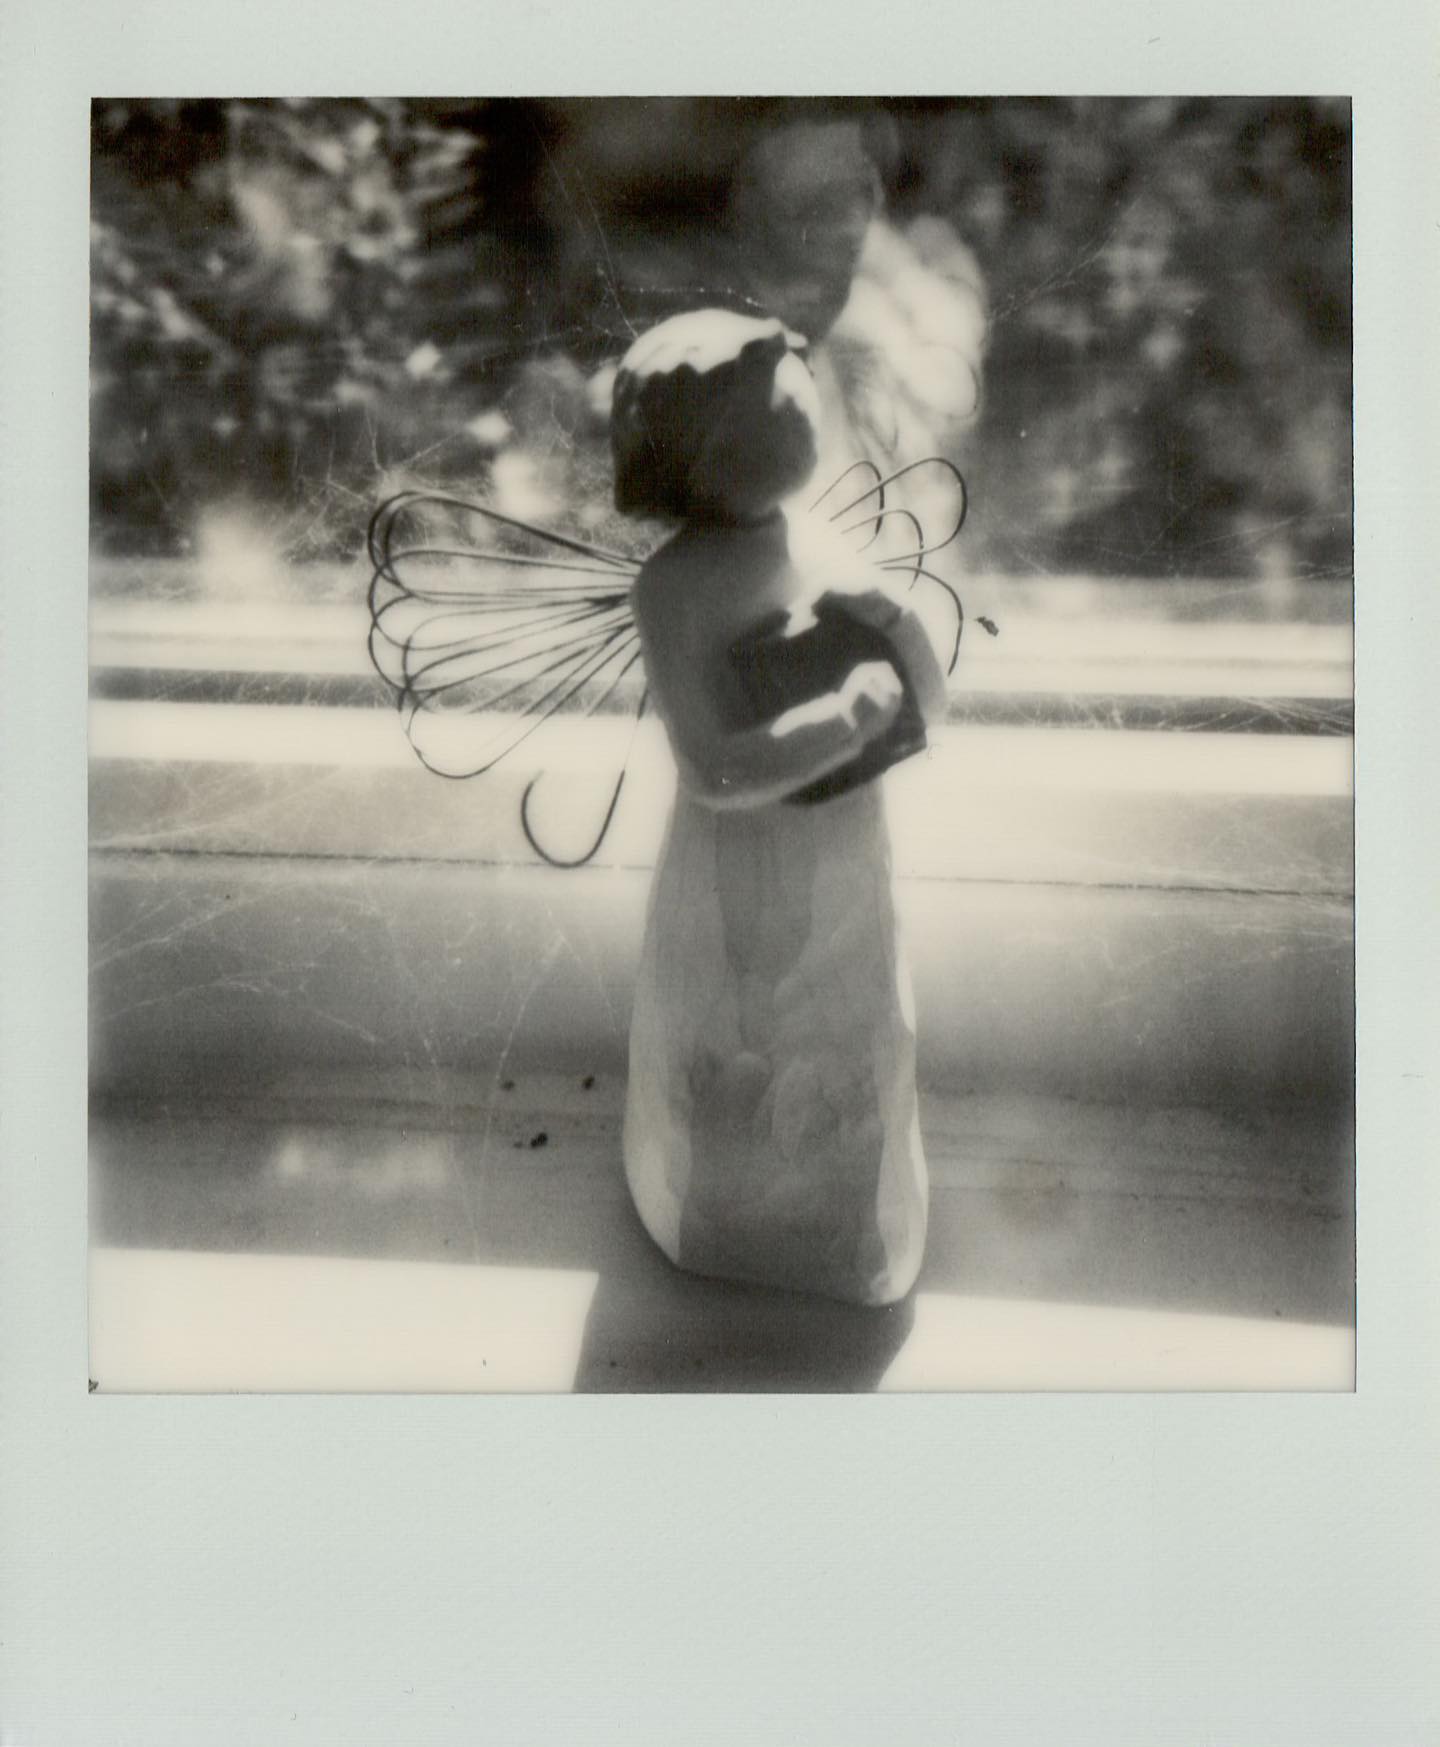 Angel

One of the best things about the SX-70 is how close it can focus. None of this 3-4 feet crap. No. 10 inches, or even closer if you have the close-up lens attachment. Makes it the perfect camera to use when the world is falling apart and you canât leave your house for fear of catching a deadly disease so you start looking to see if there are some little things around the house that you havenât noticed. So all my shots this week for #roidweek are going to be from my @mintcamera #slr670s, the best version of the SX-70 available. #polaroidweek2020 #polaroidweek #polaroid #mintcamera #film #filmphotography #fscpolaroid